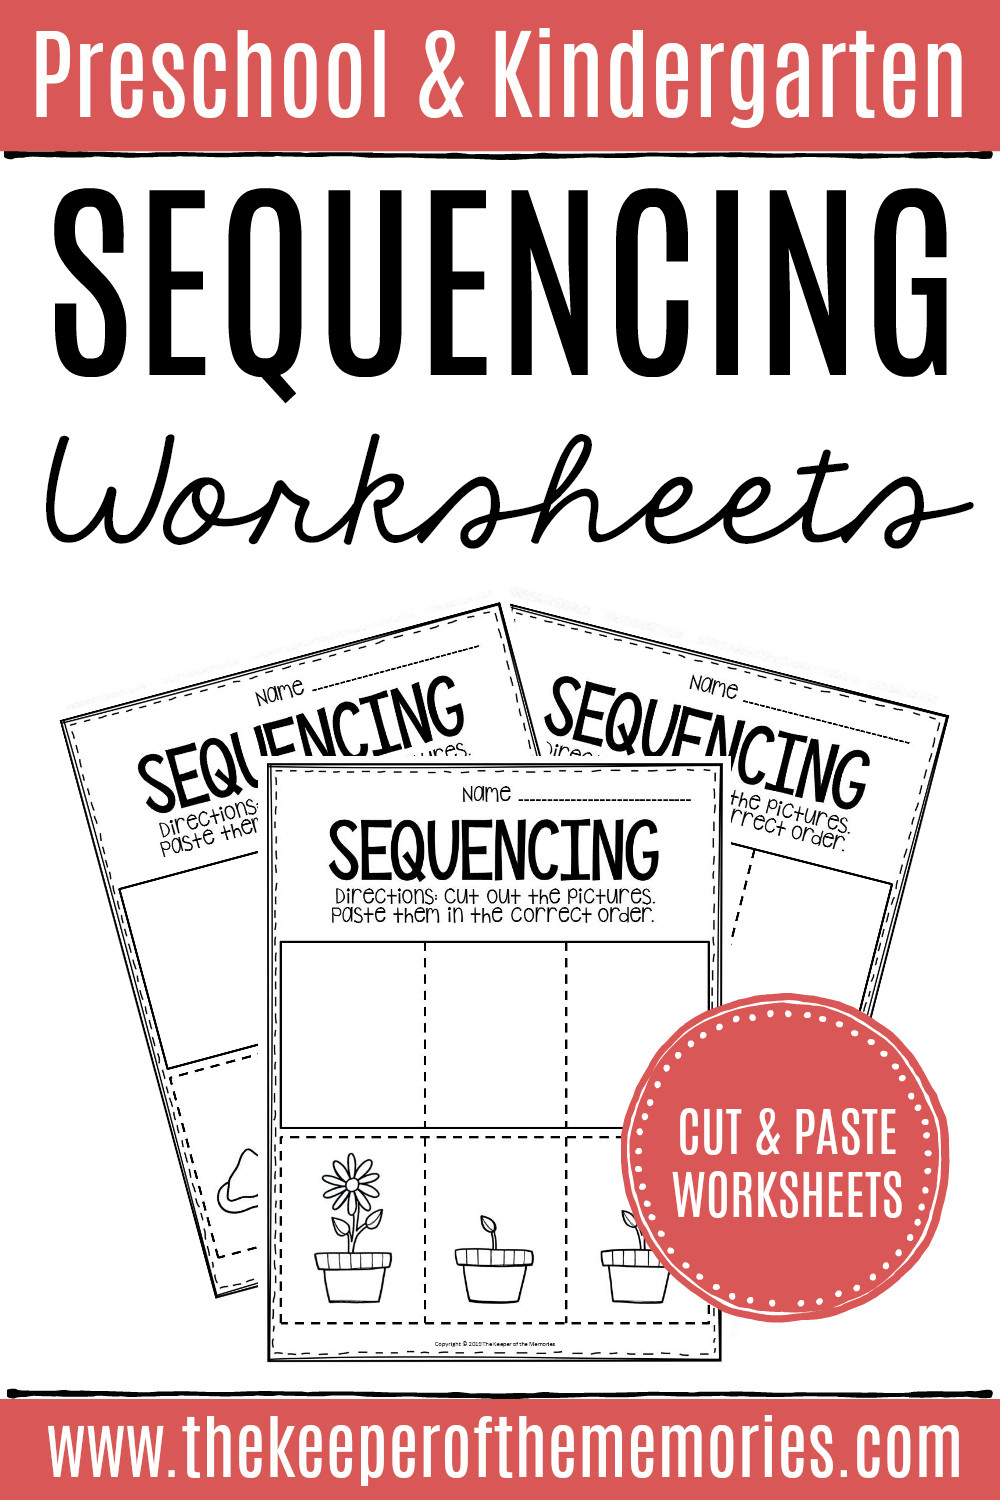 Printable Sequence Worksheets 3 Step Sequencing Worksheets the Keeper Of the Memories